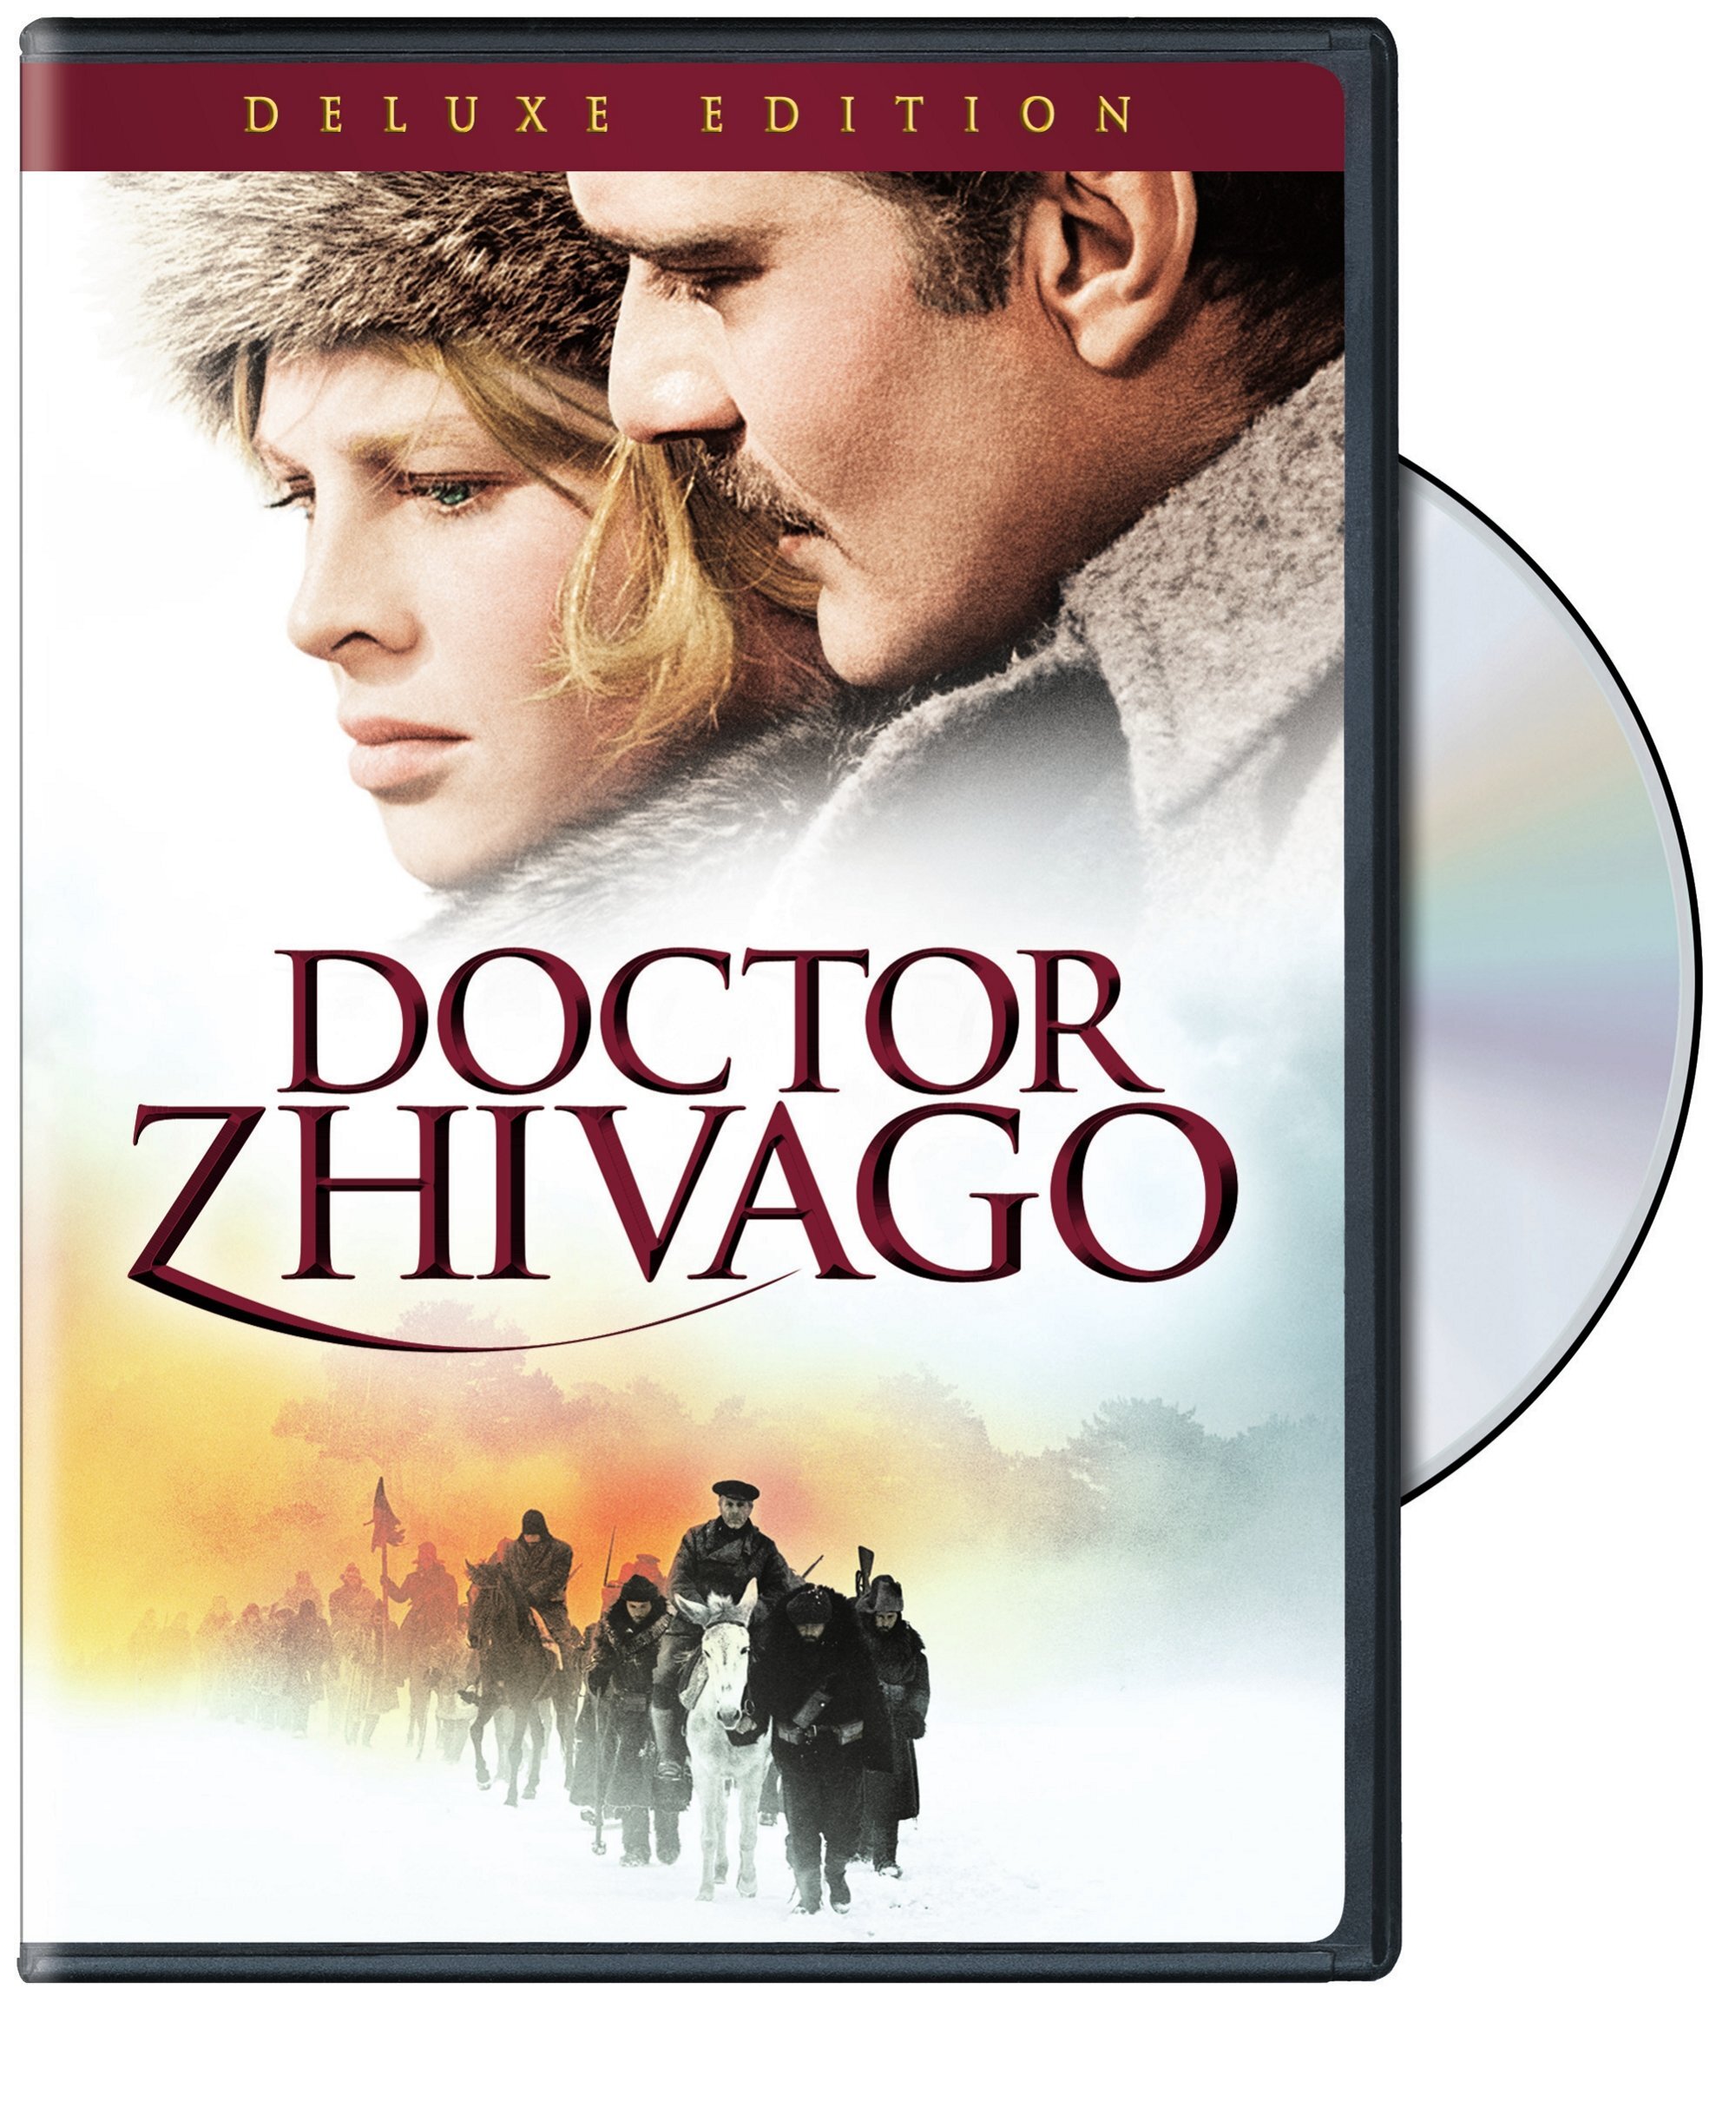 Doctor Zhivago (Deluxe Edition) - DVD [ 1965 ]  - Modern Classic Movies On Blu-ray - Movies On GRUV